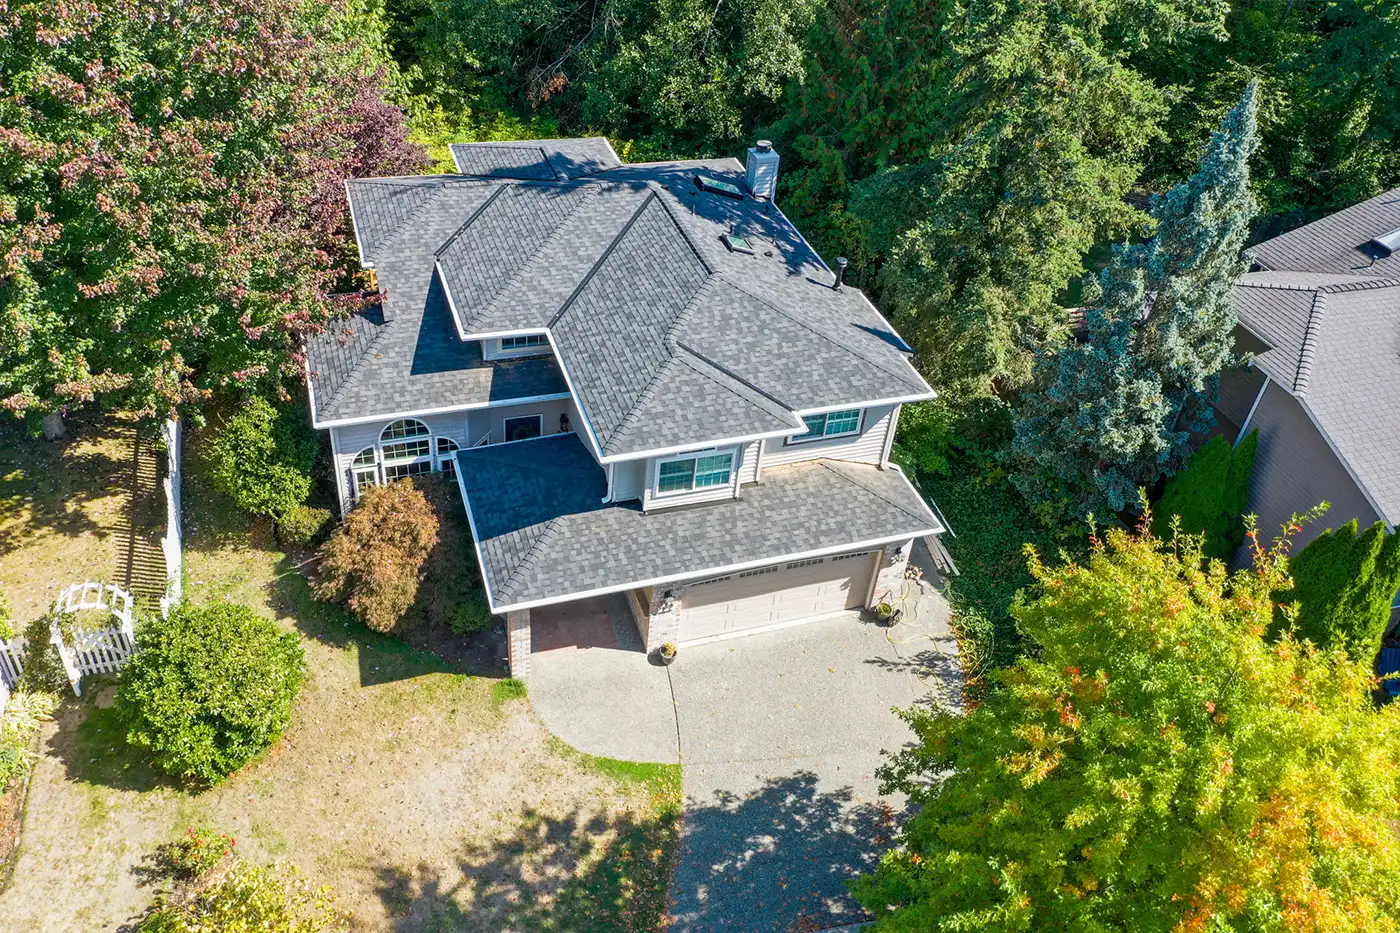 Composite Asphalt Shingle in Kirkland, Washington - view of the new roof and front of the house from an angle